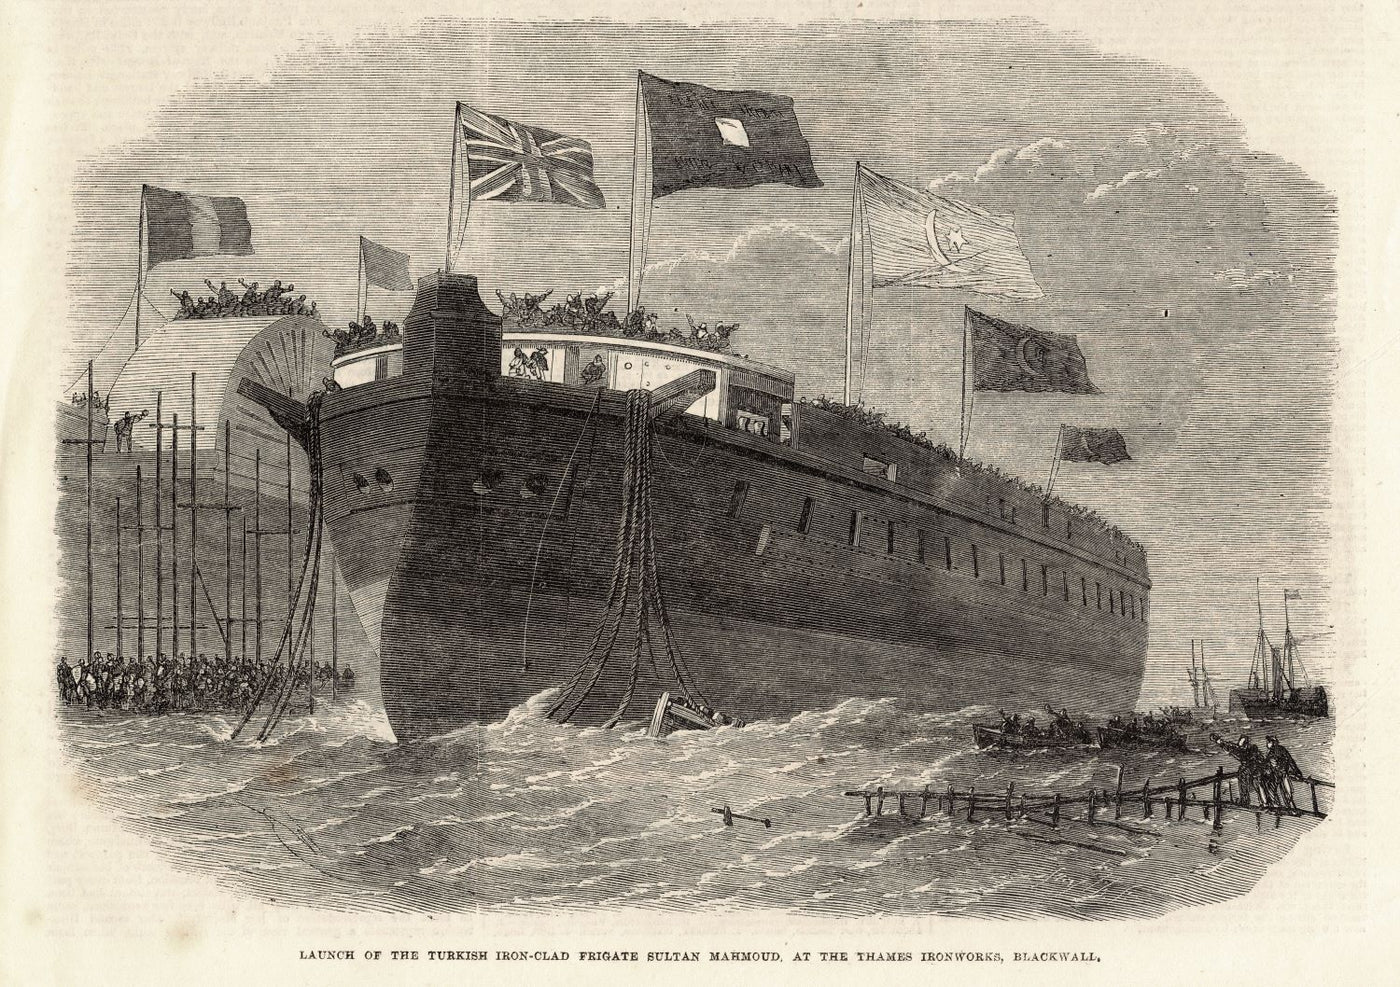 Sultan Mahmoud launch at Thames Ironworks antique print 1864